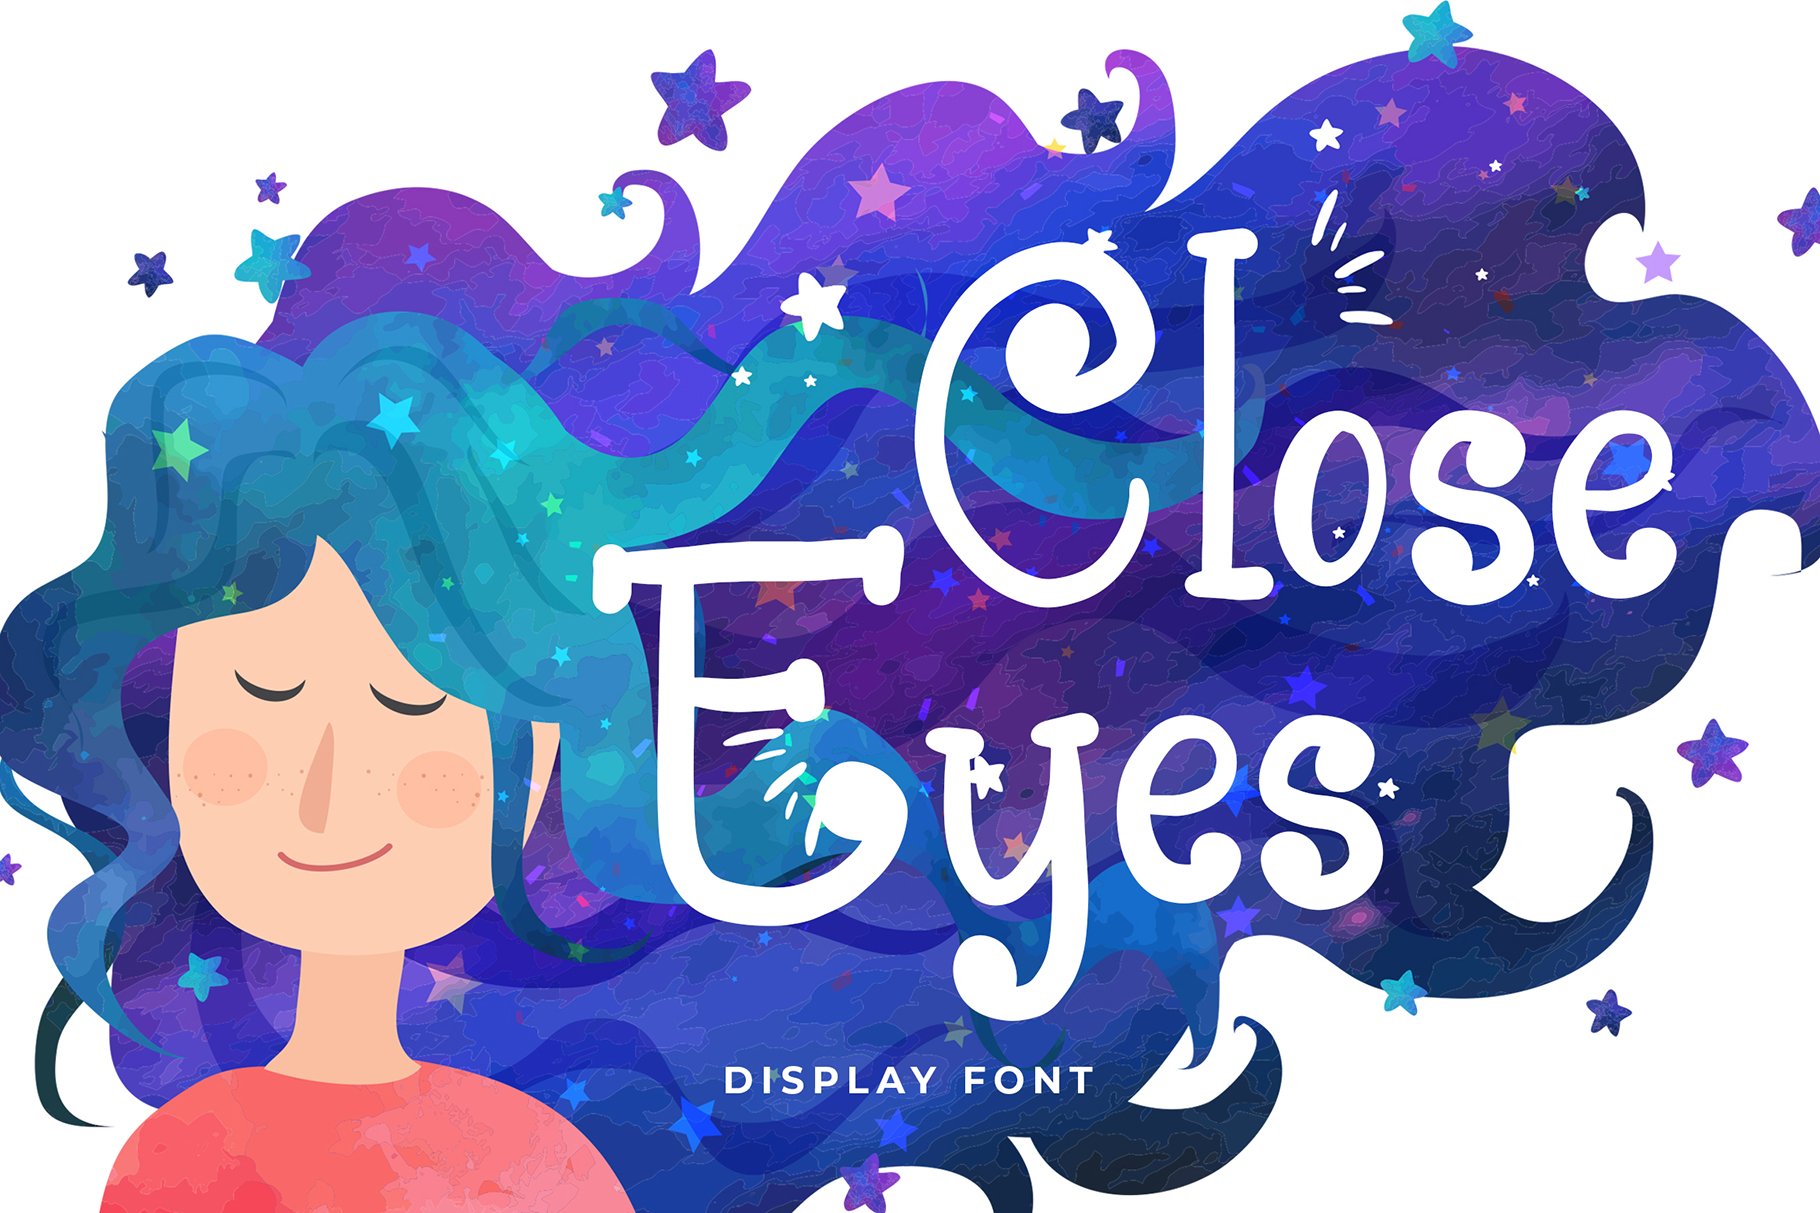 Close Eyes Playful Display Font cover image.